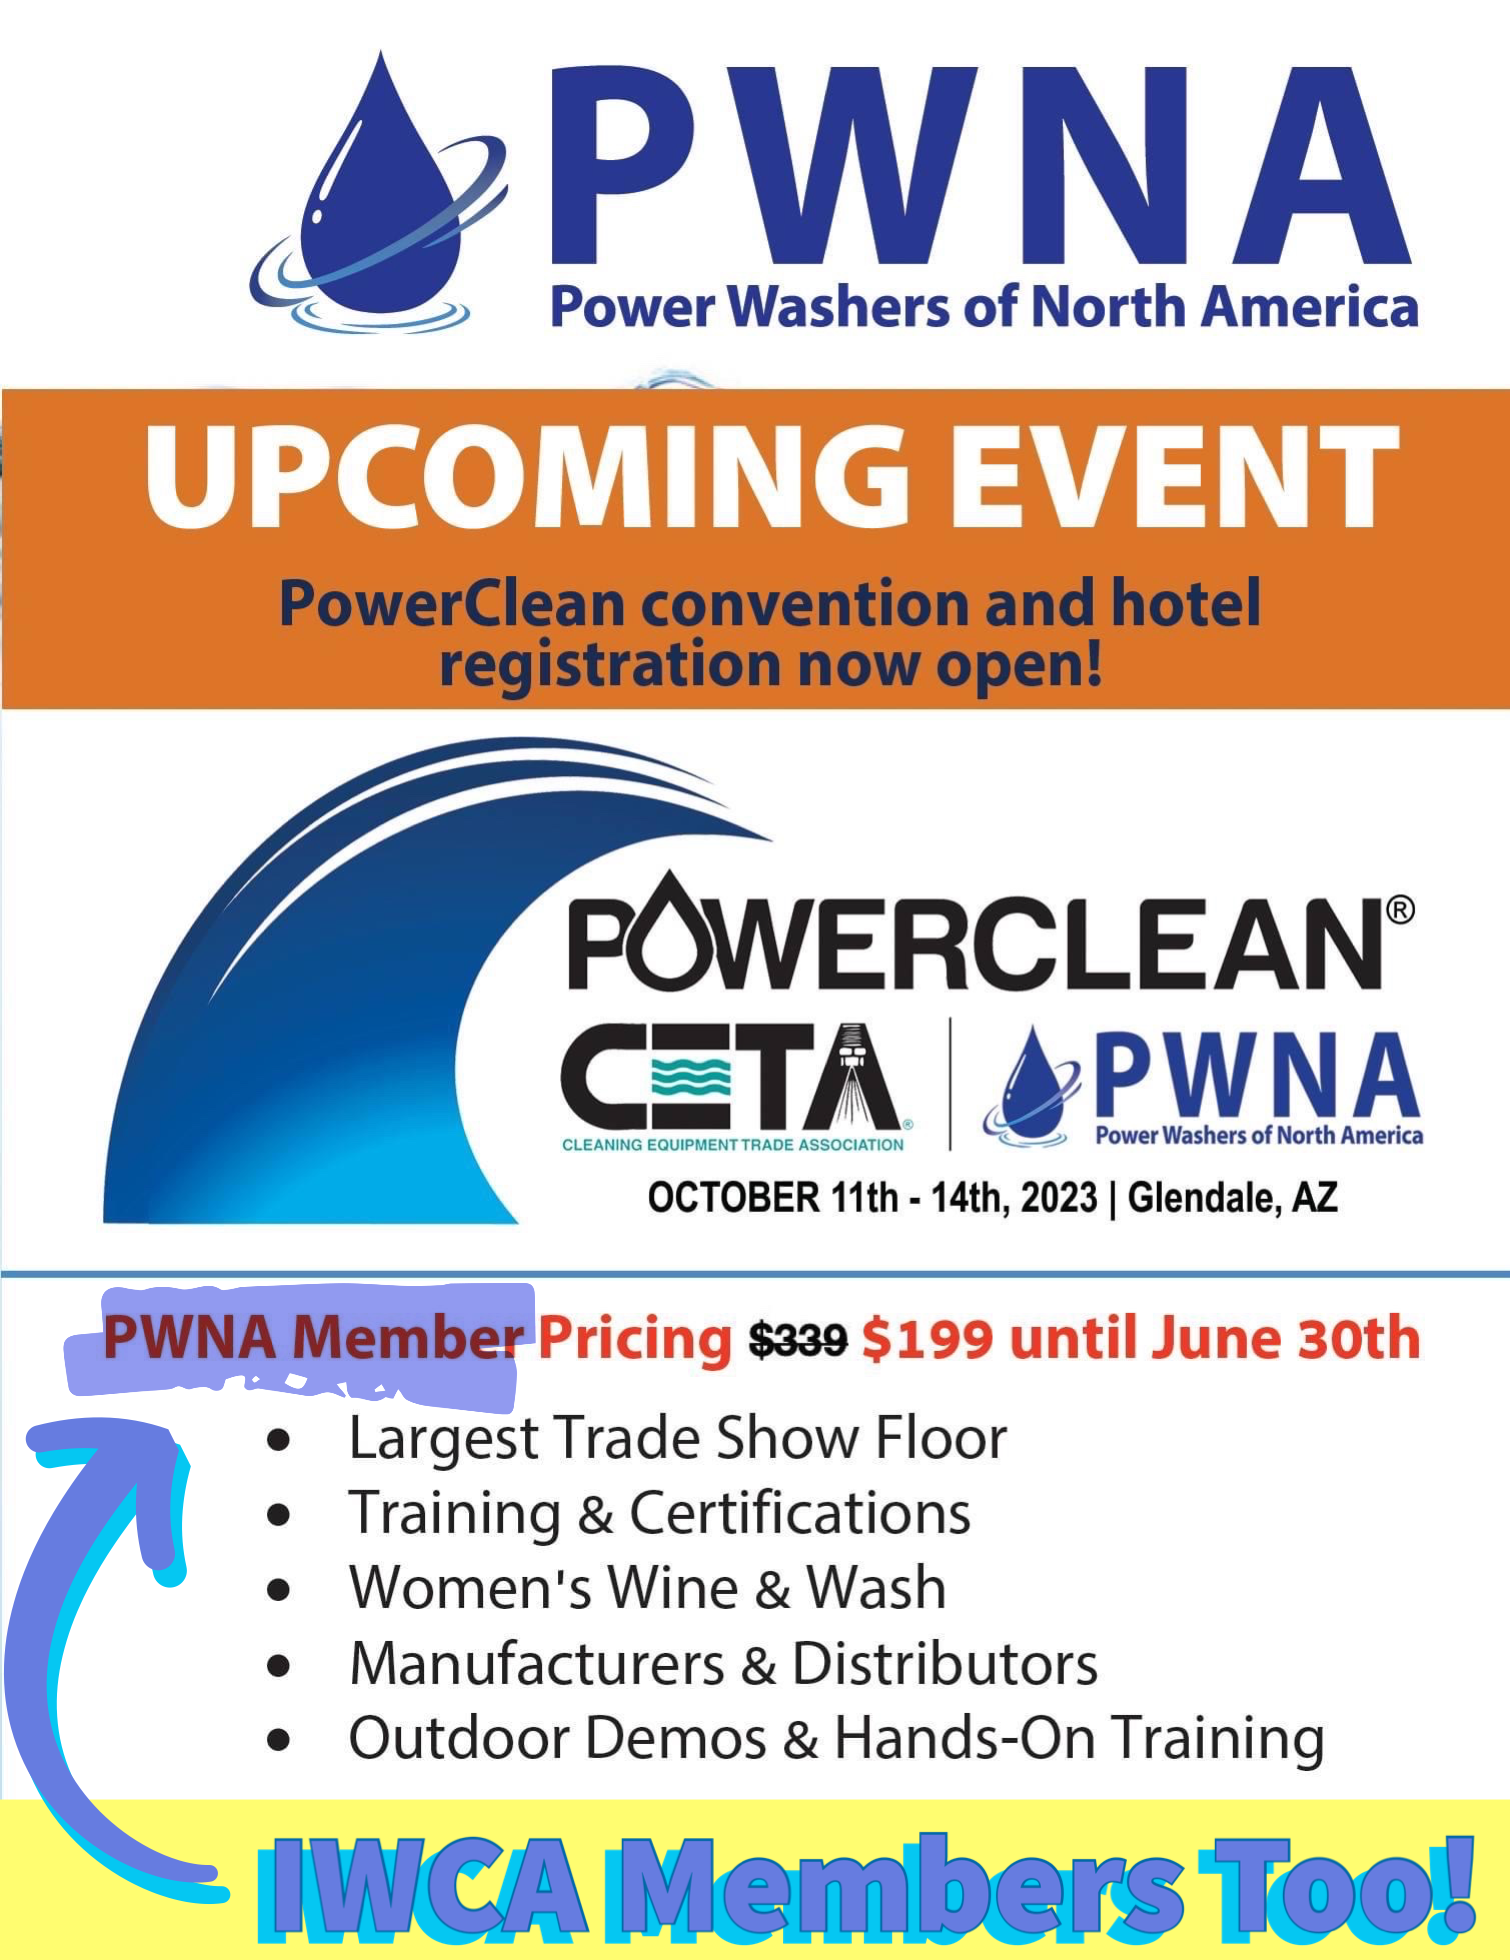 https://www.iwca.org/wp-content/uploads/2019/08/PowerClean2023.png